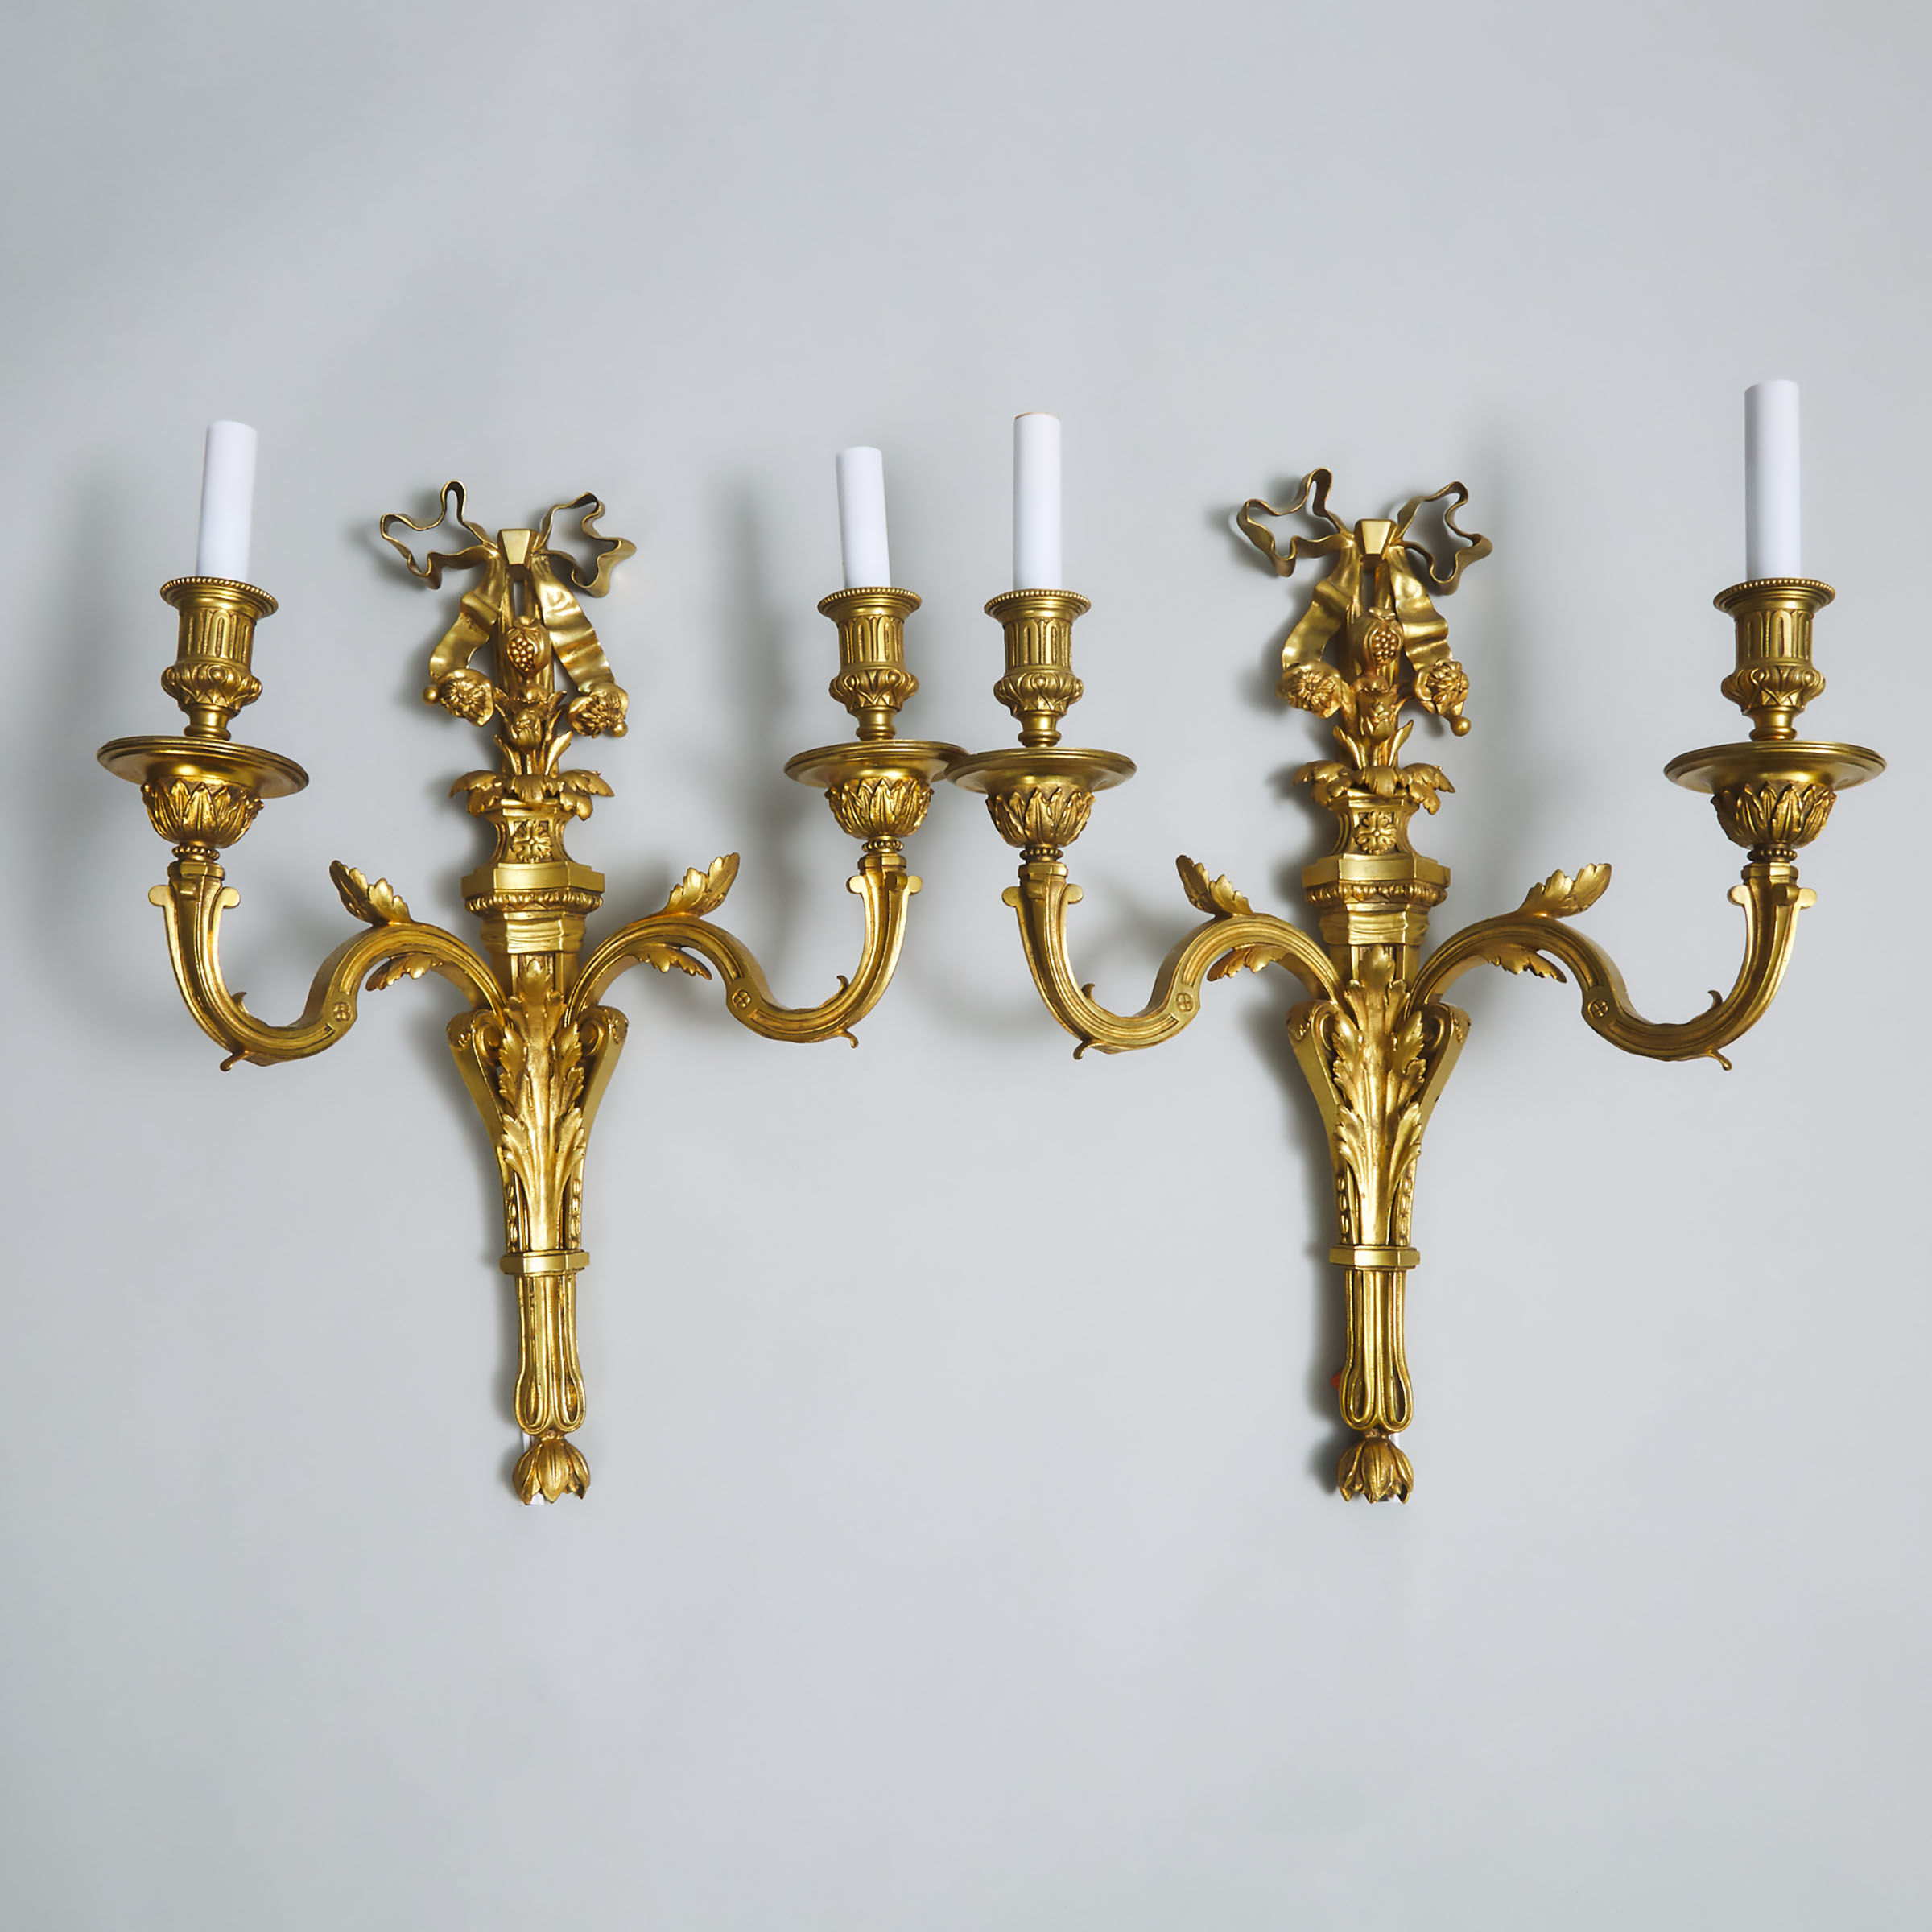 Pair of Large French Neoclassical Gilt Bronze Two Candle Wall Sconces, 20th century